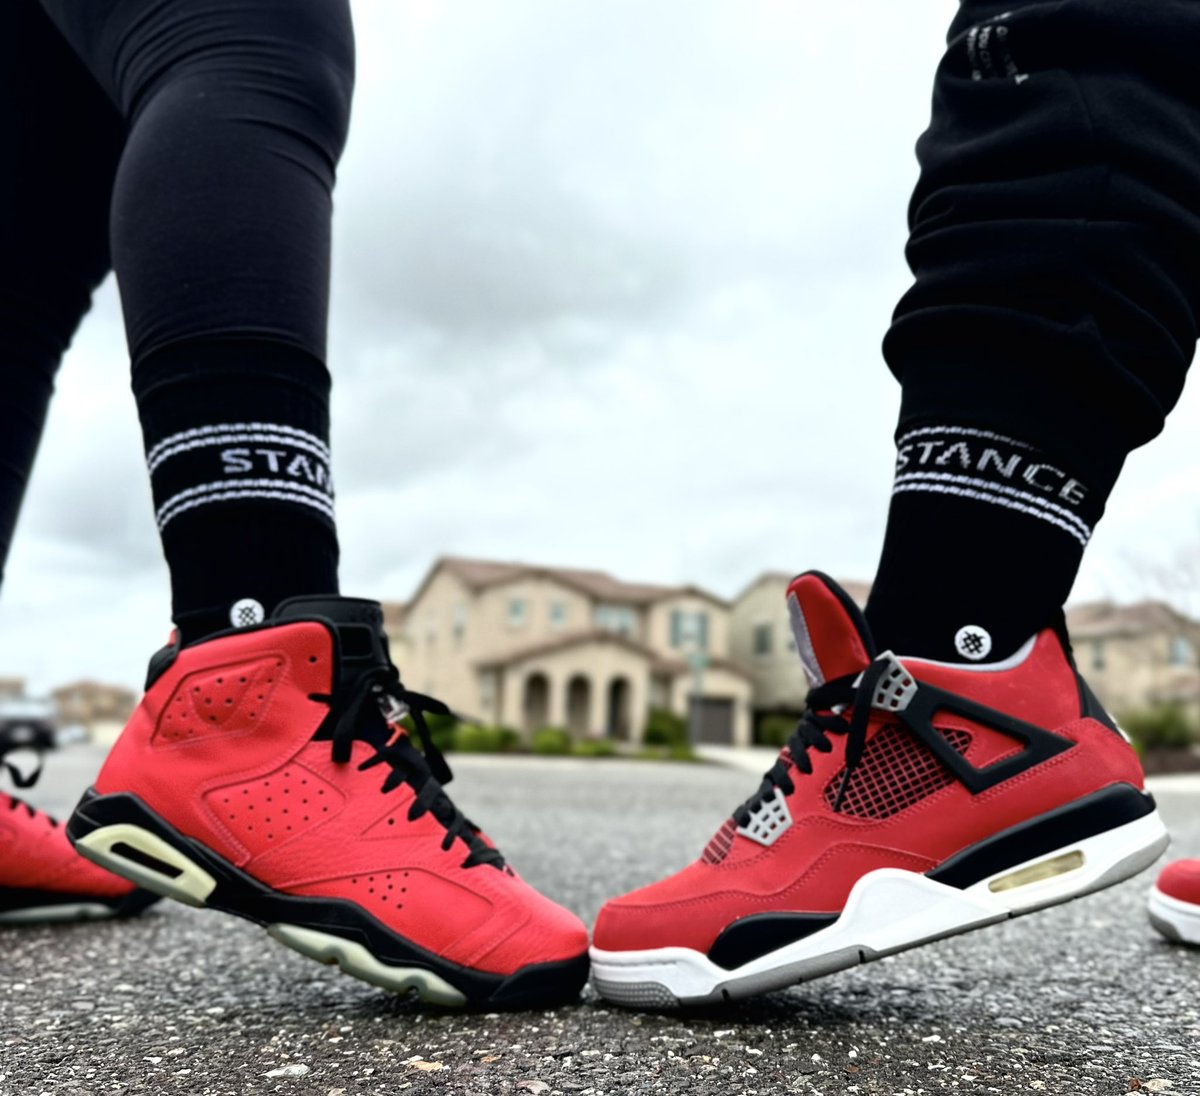 We out here in the OG TORO's !!
Painting the town red on this rainy day for #RetrosOnTheMonthAndDay
#4sonthe4th whats on your feet??
#snkrsliveheatingup
#sneakerchallenge2024
#mywifebetterthenyours
#sneakerlife #sneakerhead #sneakerfreaker #snkrskickcheck